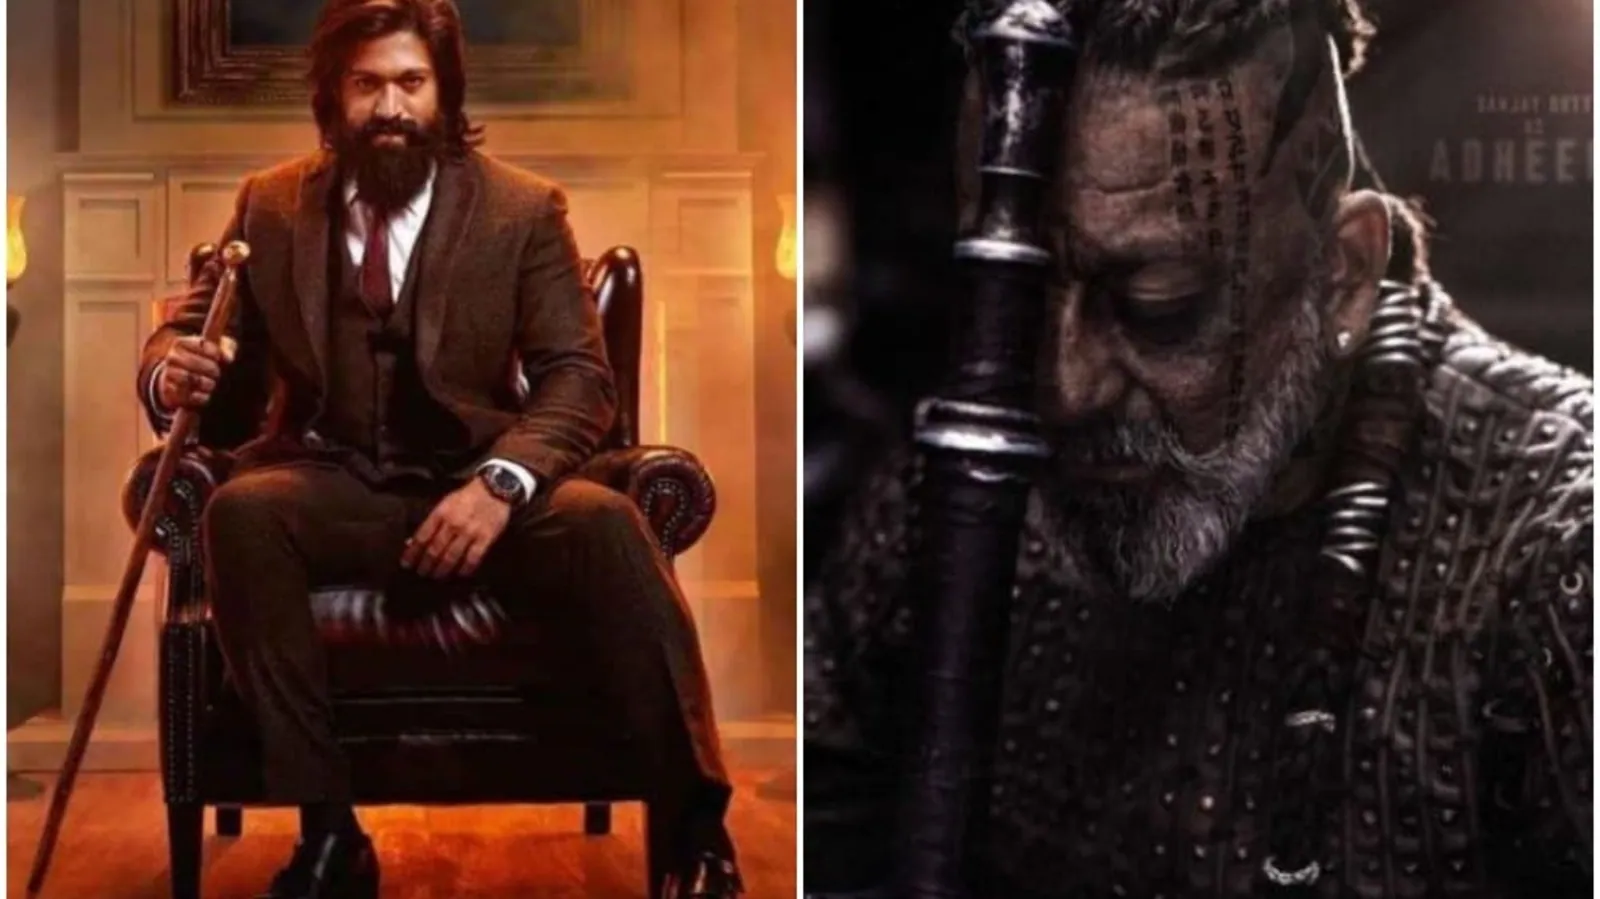 KGF 2 box office day 1 collection: Yash’s film earns ₹134 crore, Hindi version gets ₹54 crore opening